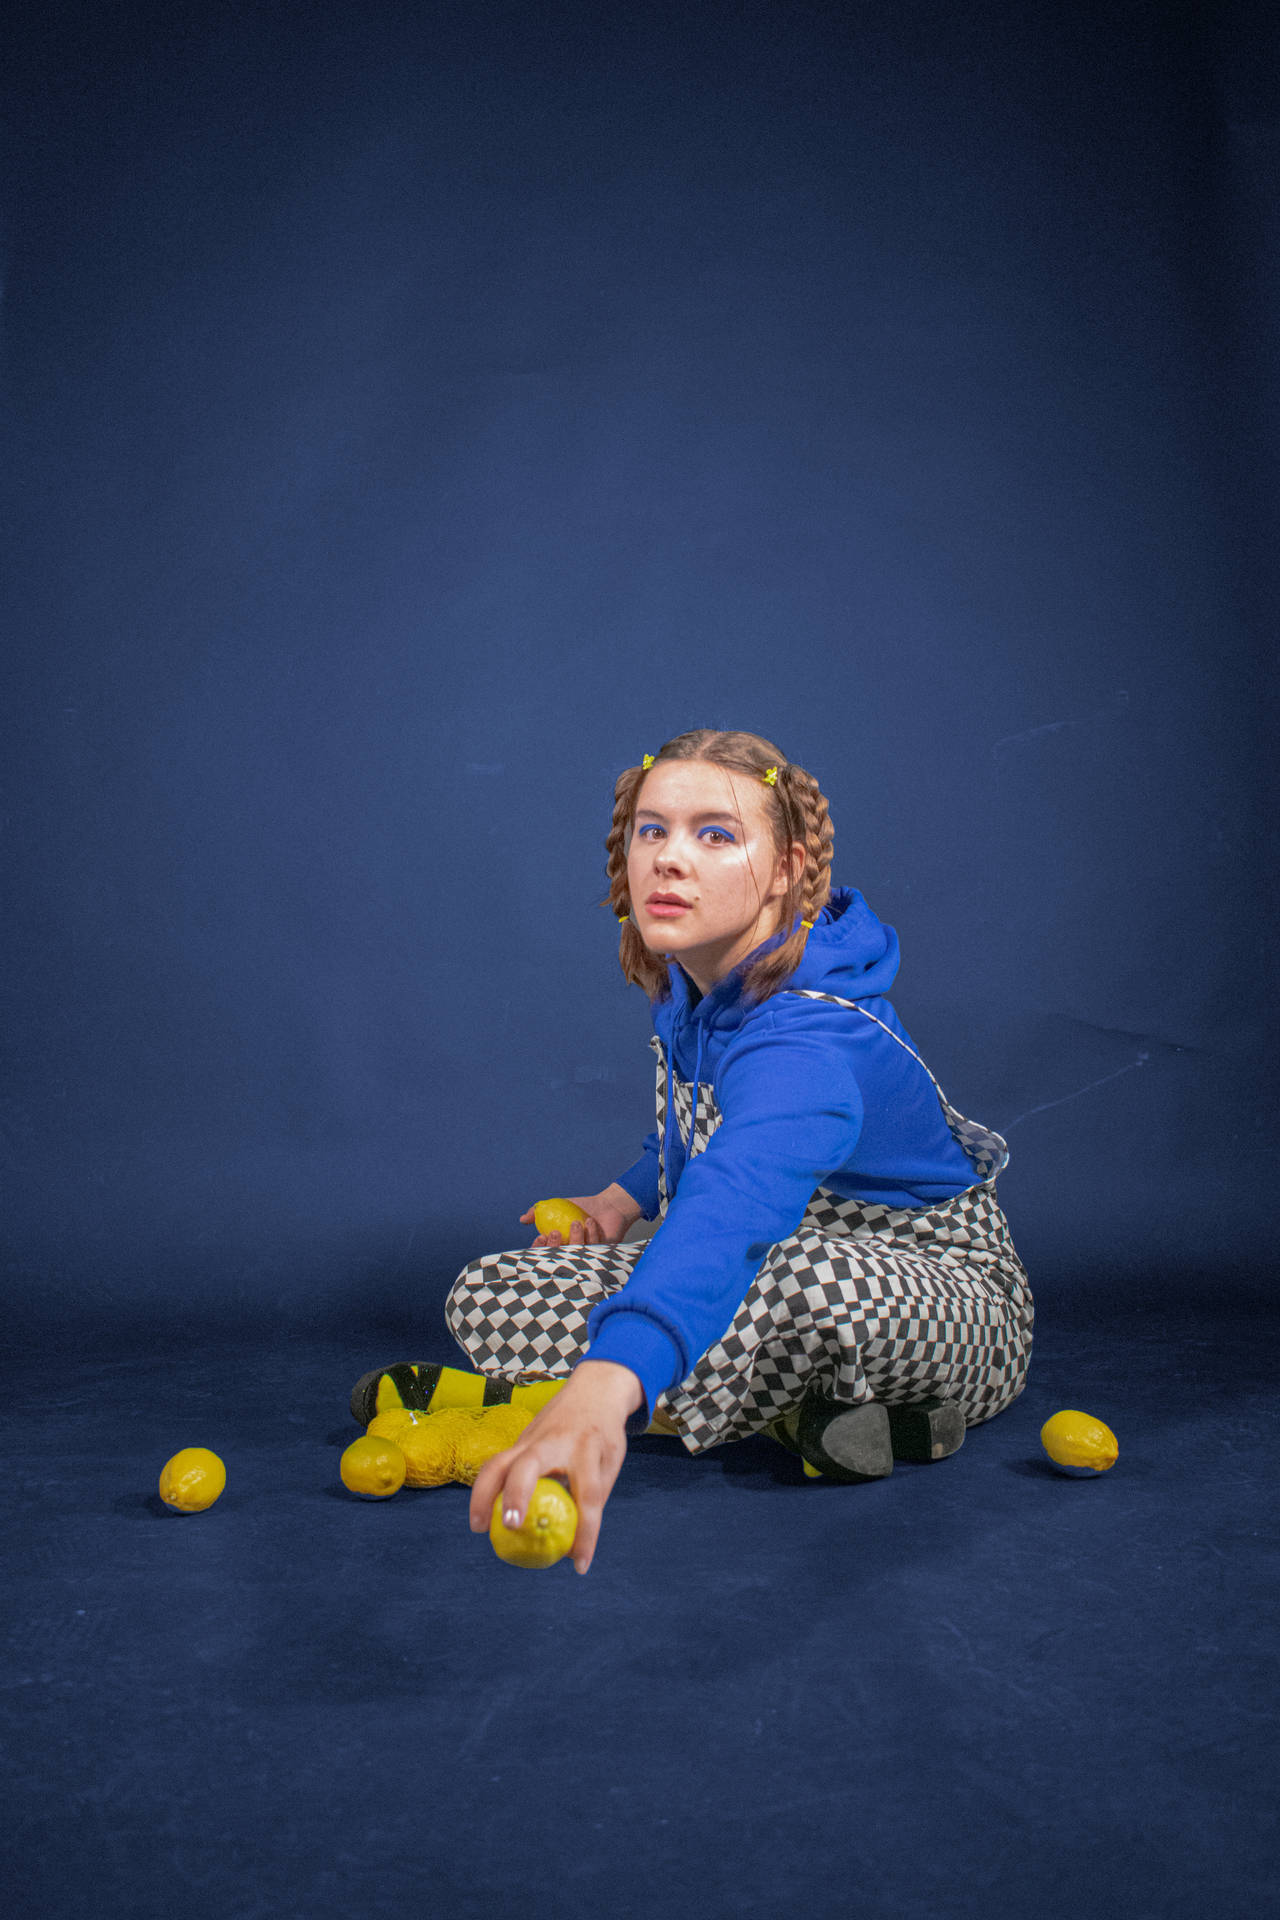 Checkered Jumpsuit Girl With Lemons